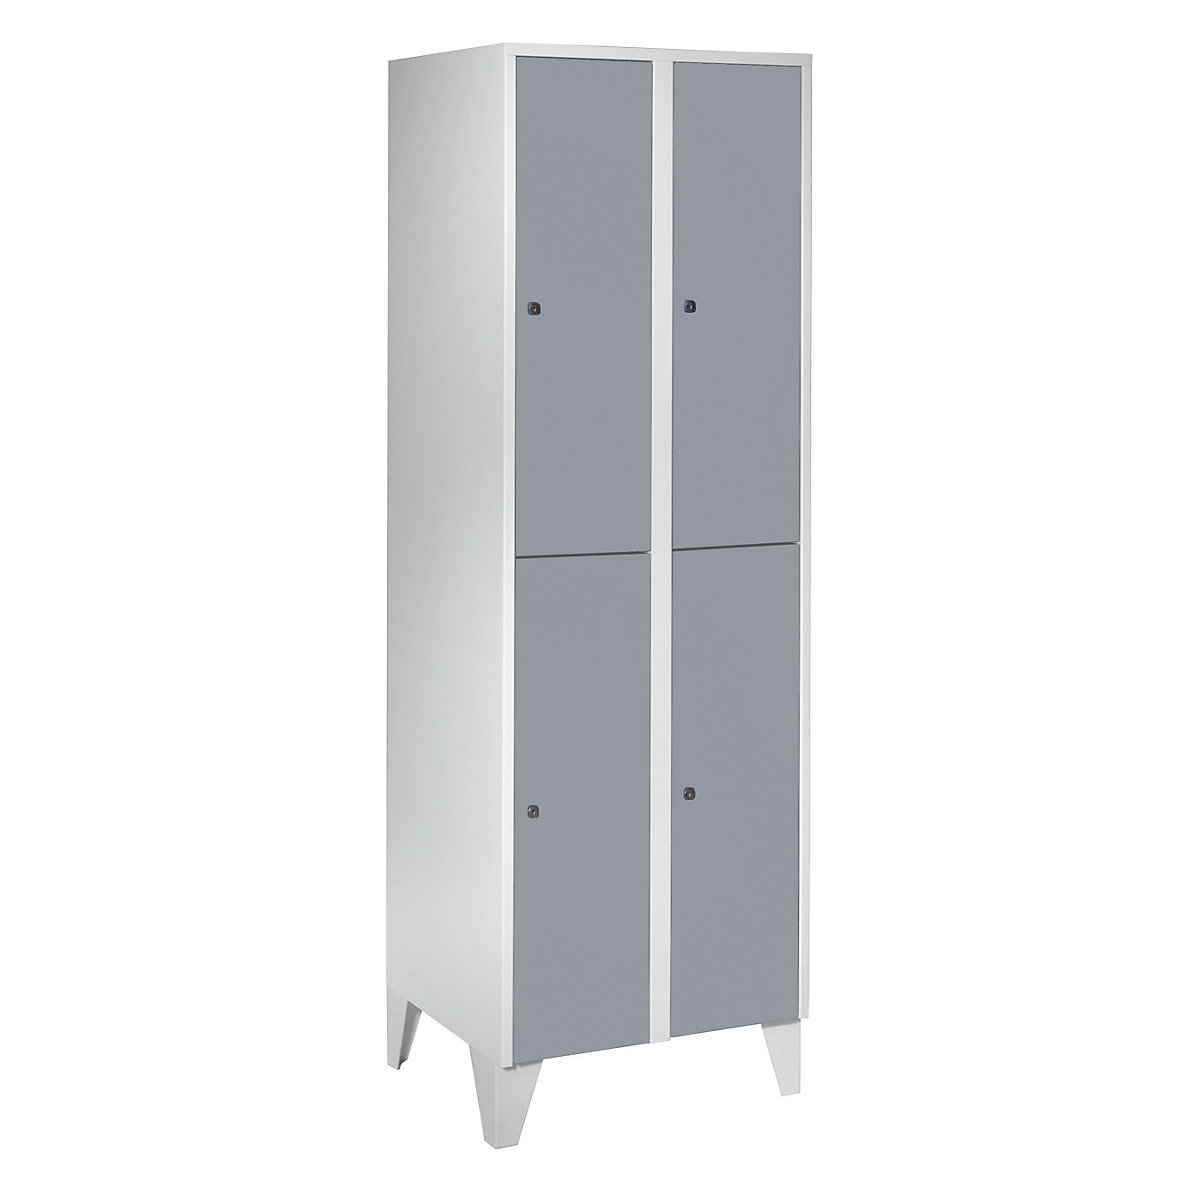 Cloakroom locker with feet – Wolf, HxWxD 1850 x 600 x 500 mm, 4 compartments, silver grey-5